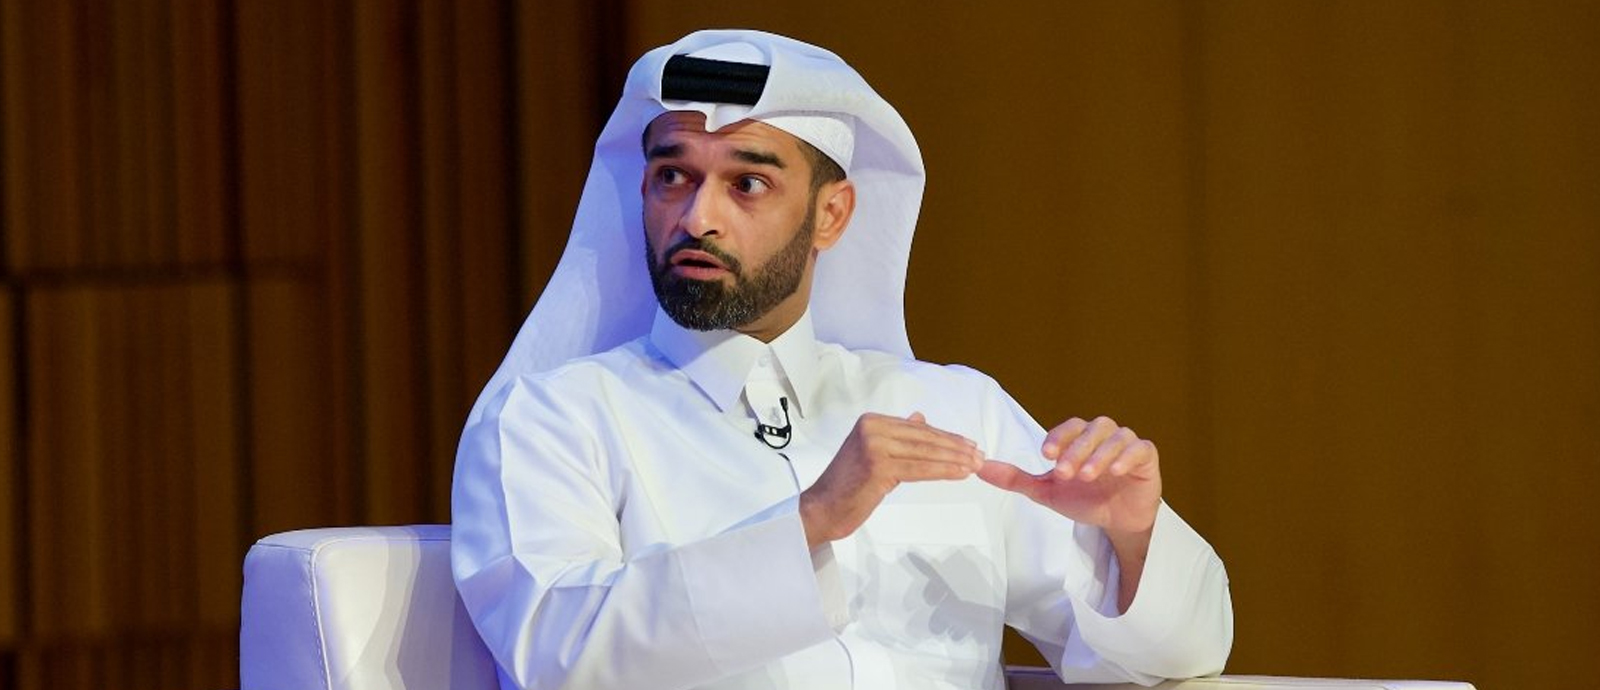 HE Hassan al-Thawadi outlines the legacy he wants the first FIFA World Cup in the Middle East and Ar HE Hassan al-Thawadi